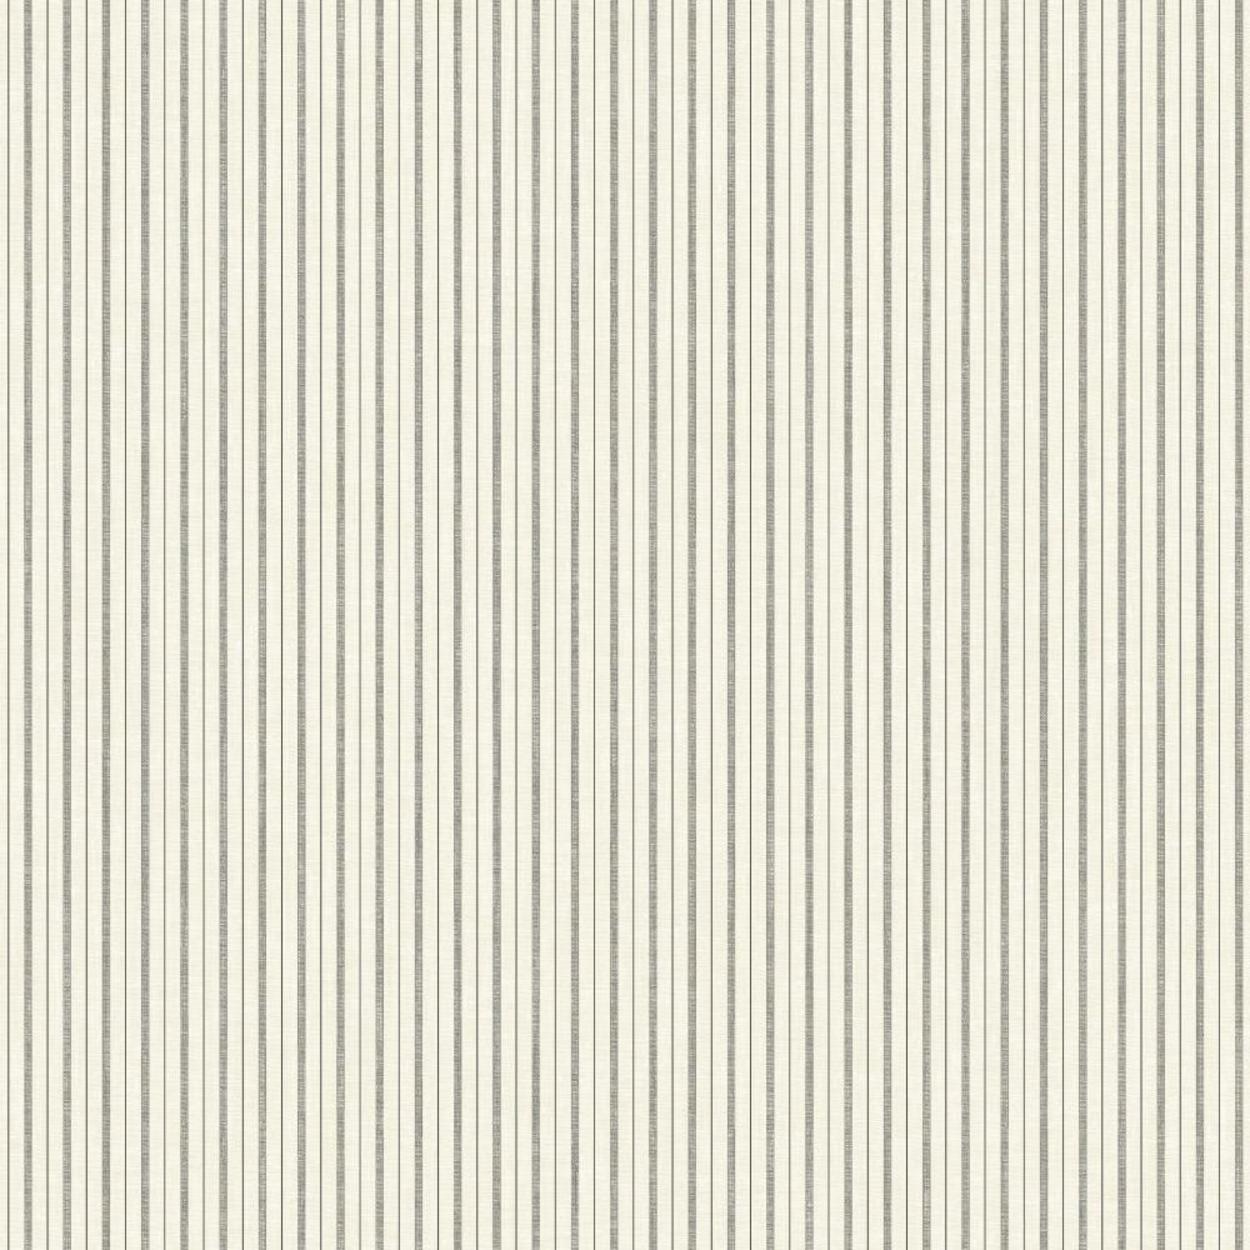 pale striped backgrounds